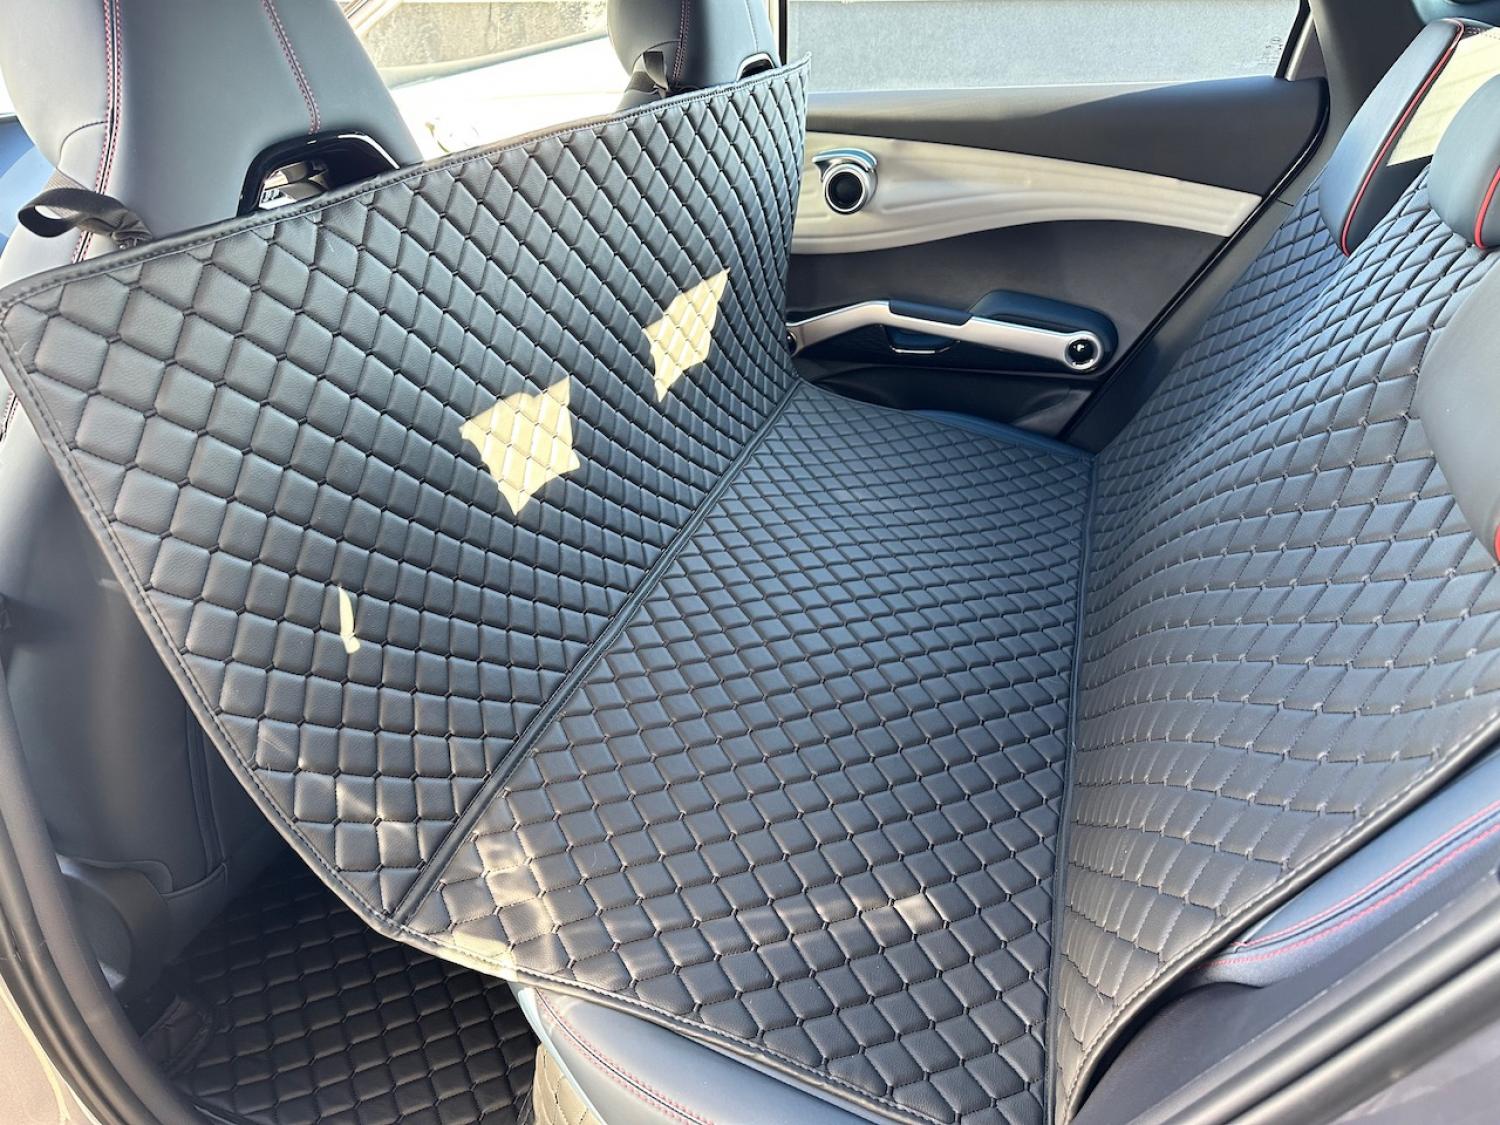 CARSTYLER® Back Seat Cover Geeignet Für Land Rover Range Rover LG/L405, 2012-2021